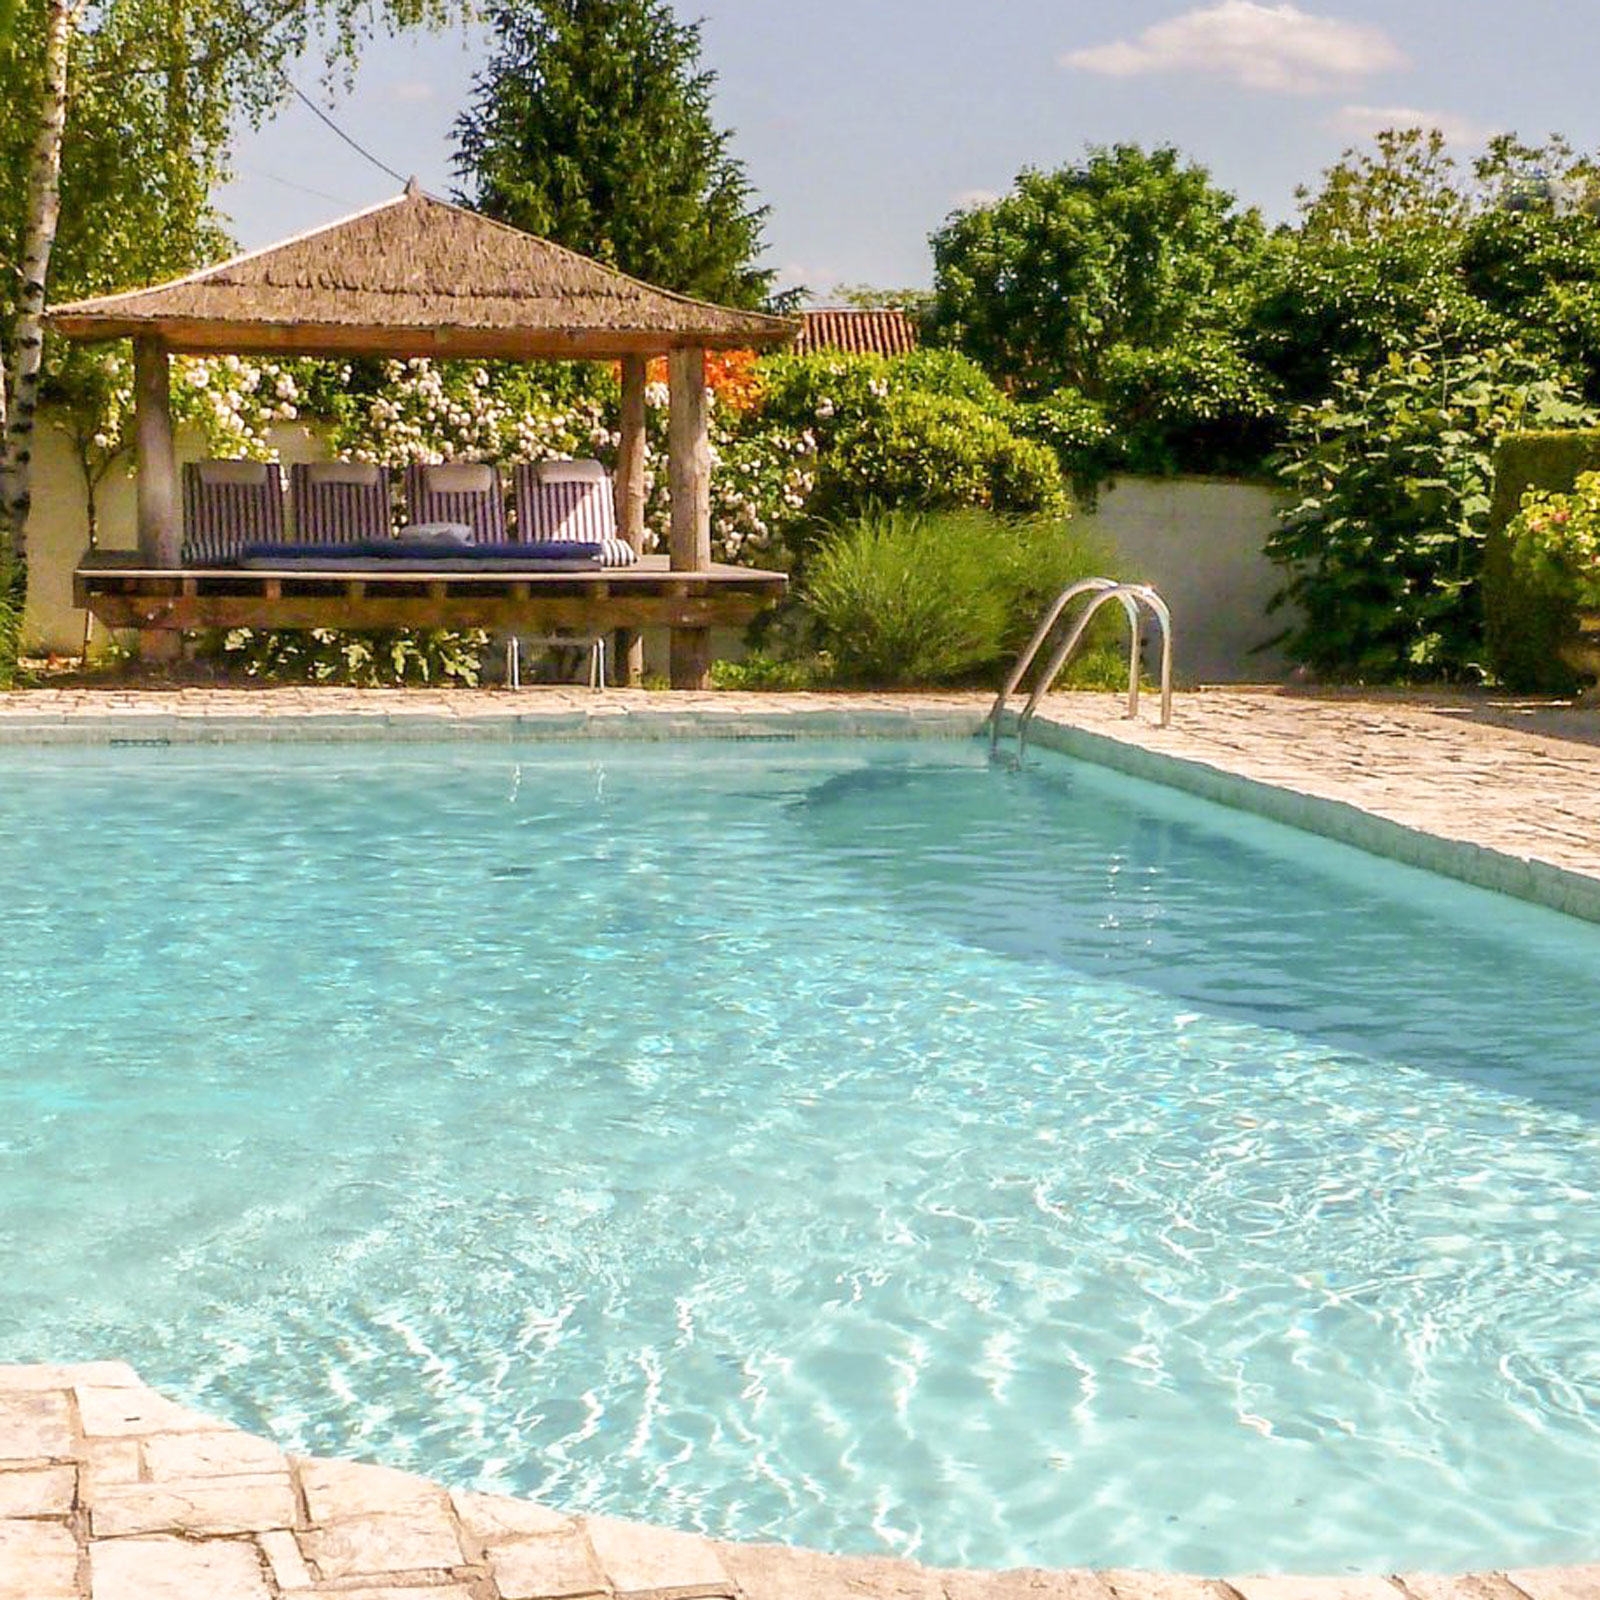 La Roussie holiday villa in the Dordogne with a private pool SWFrance